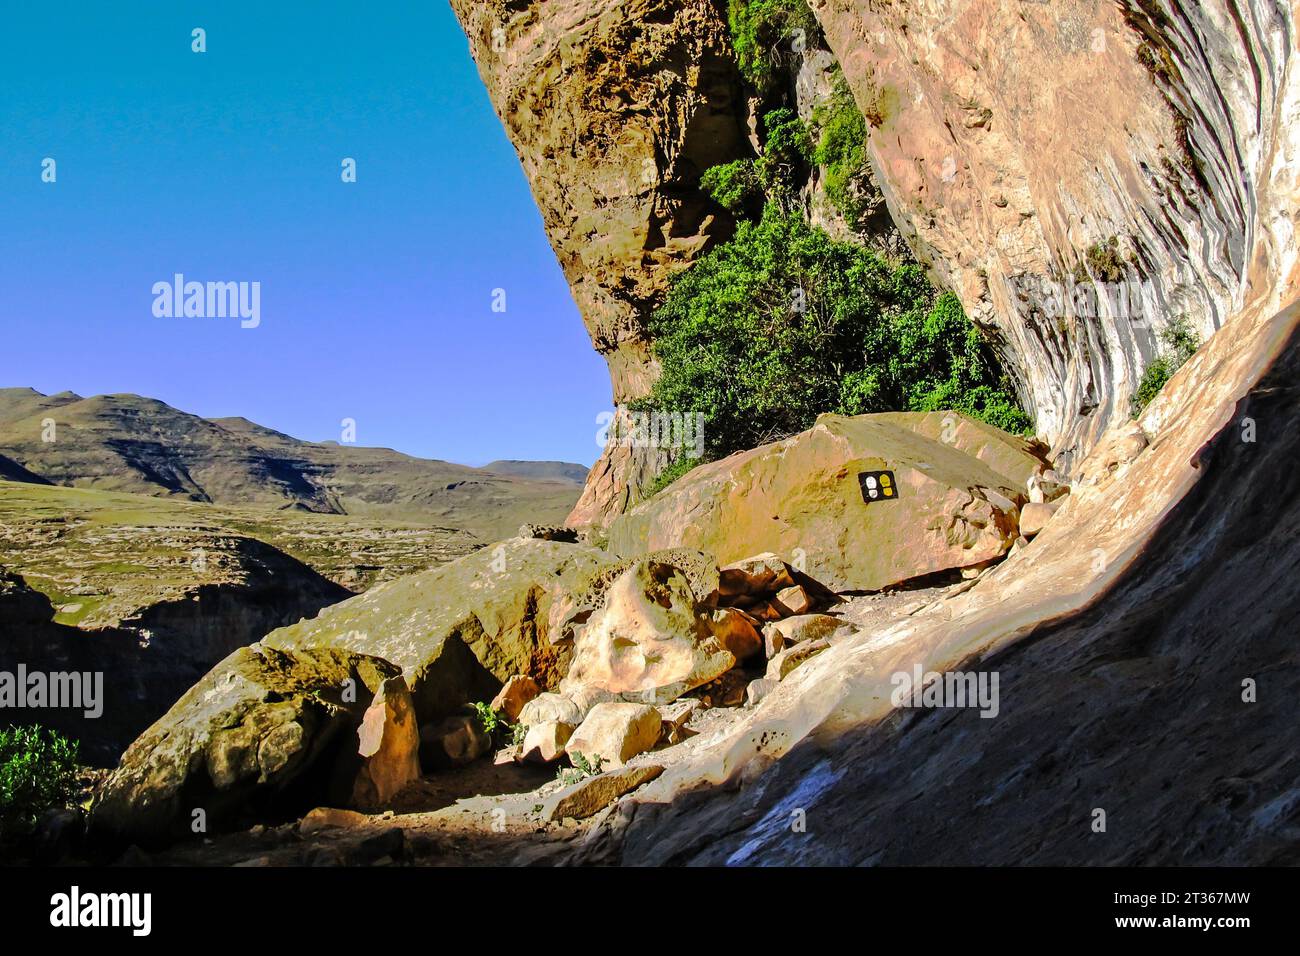 Hiking route markers in an overhand in the Drakensberg Mountains of South Africa Stock Photo